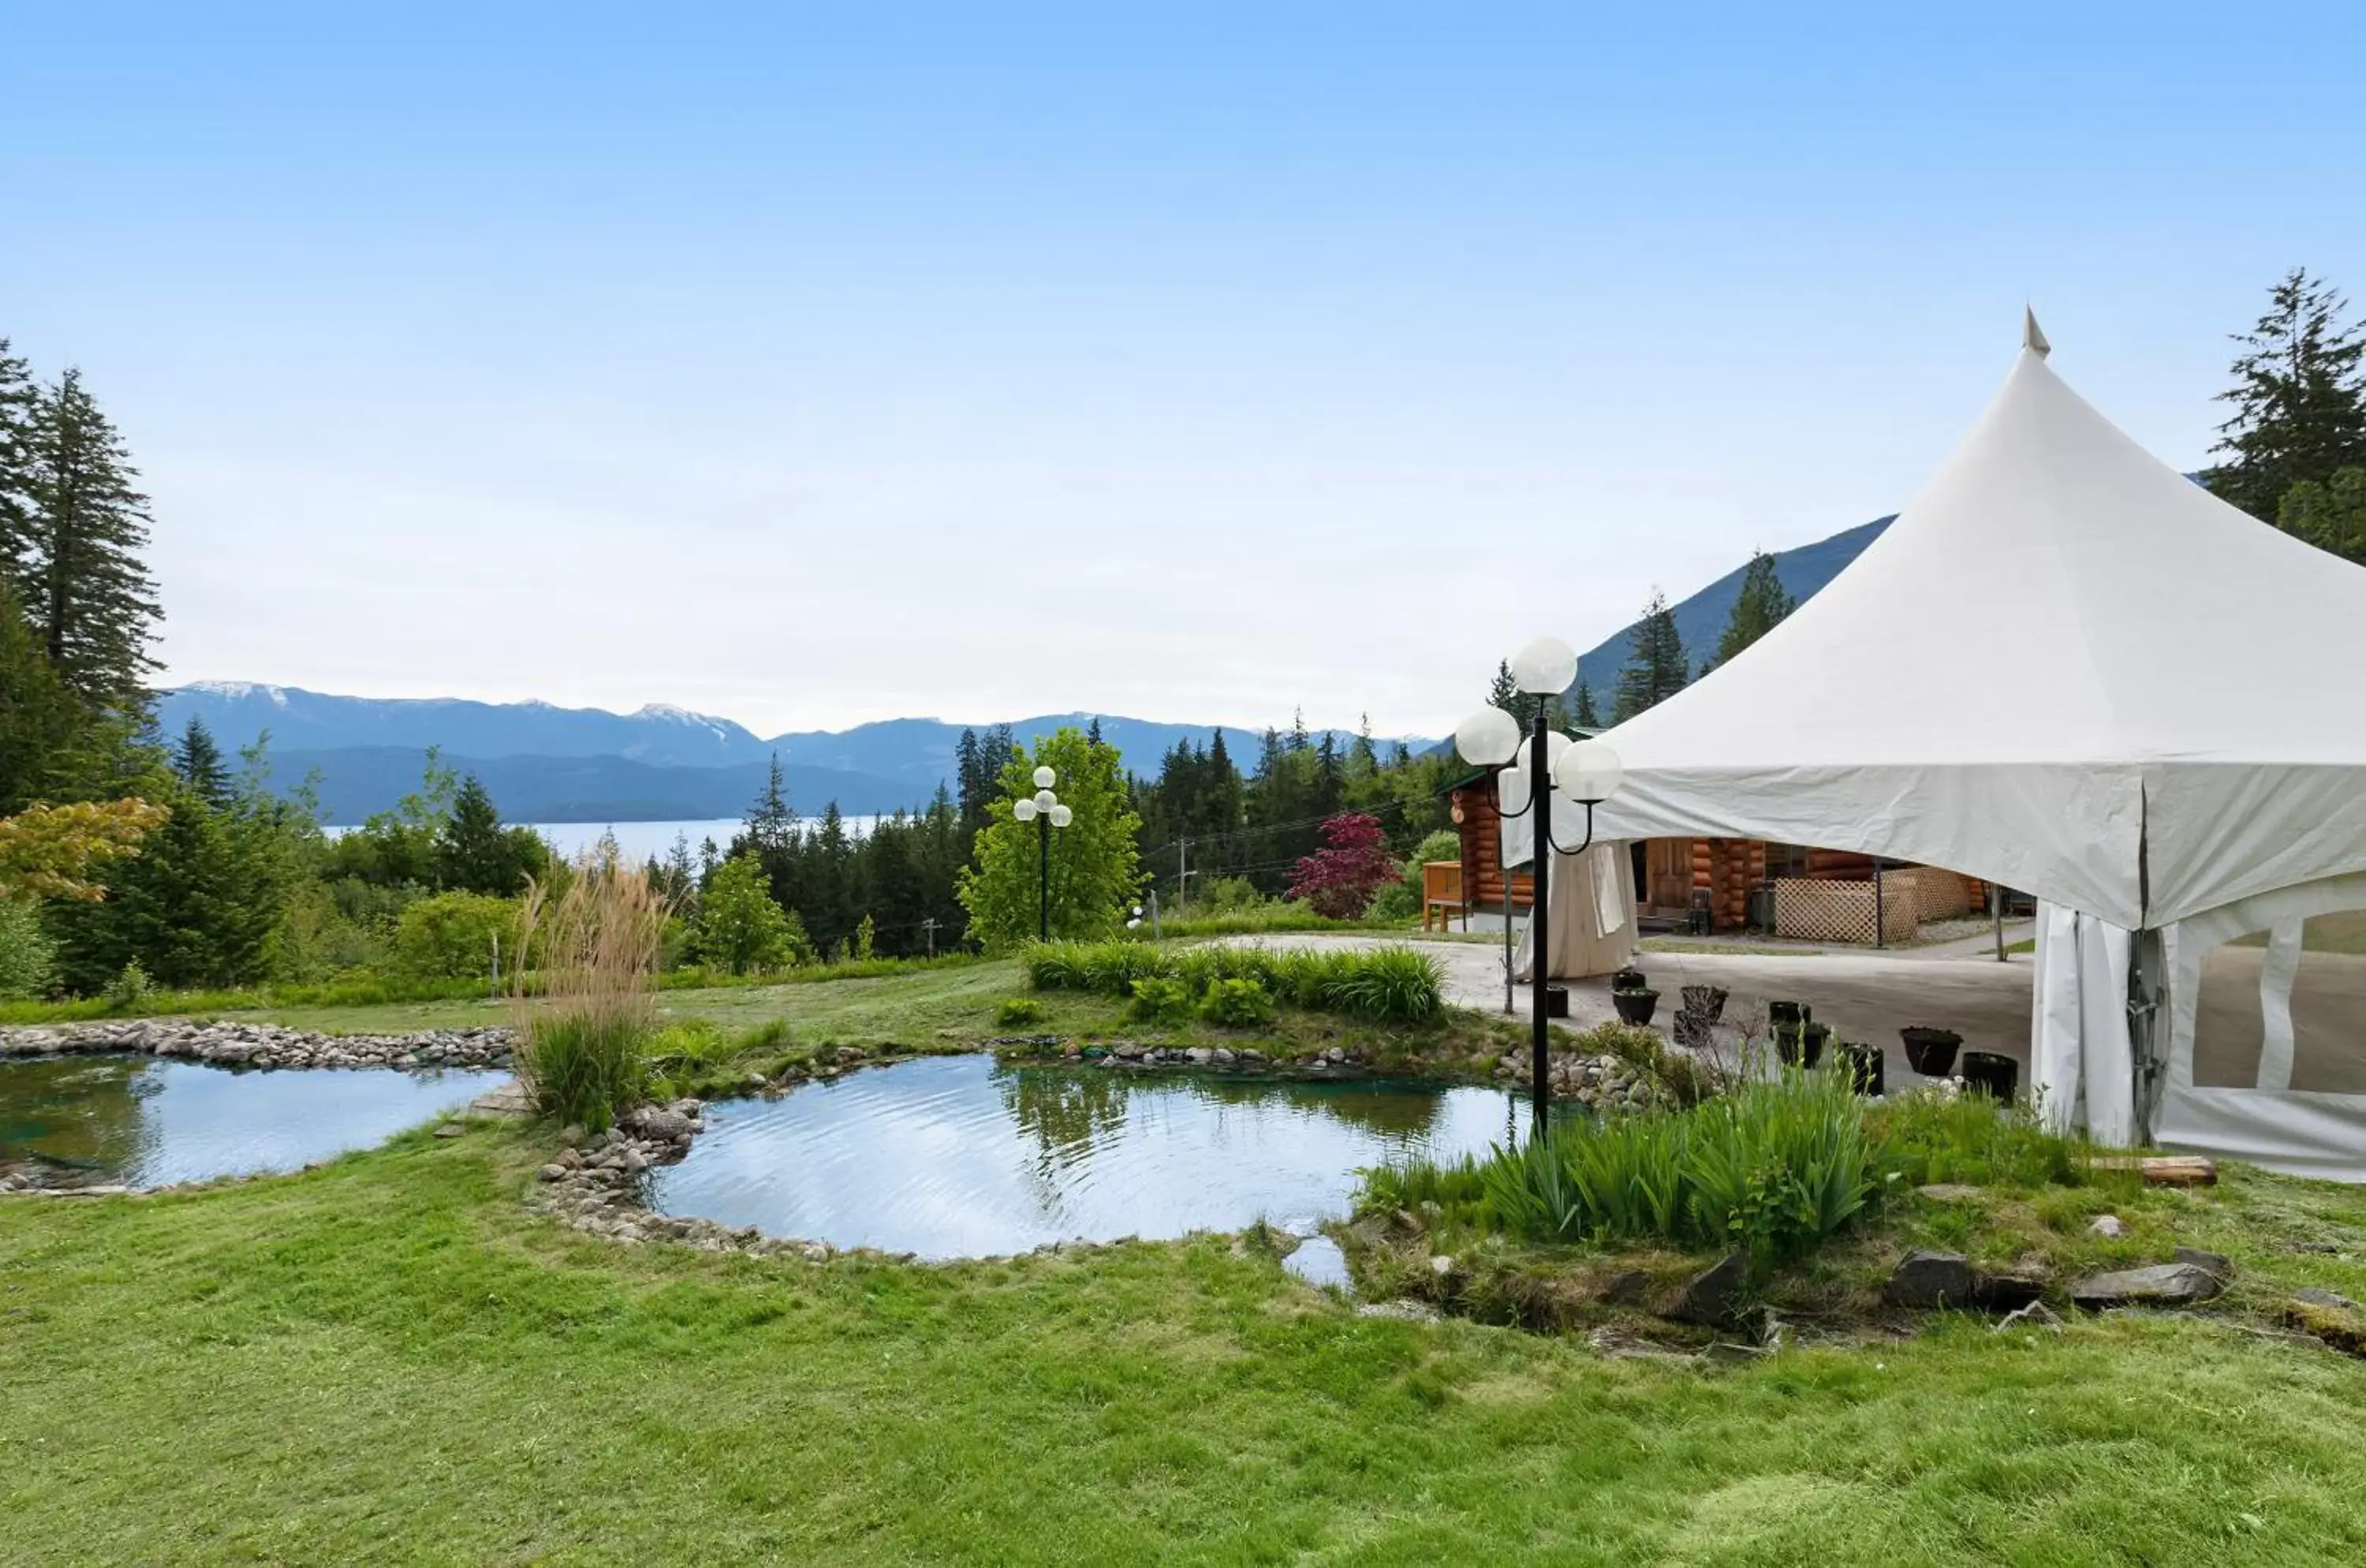 Banquet/Function facilities, Garden in Kootenay Lakeview Resort BW Signature Collection